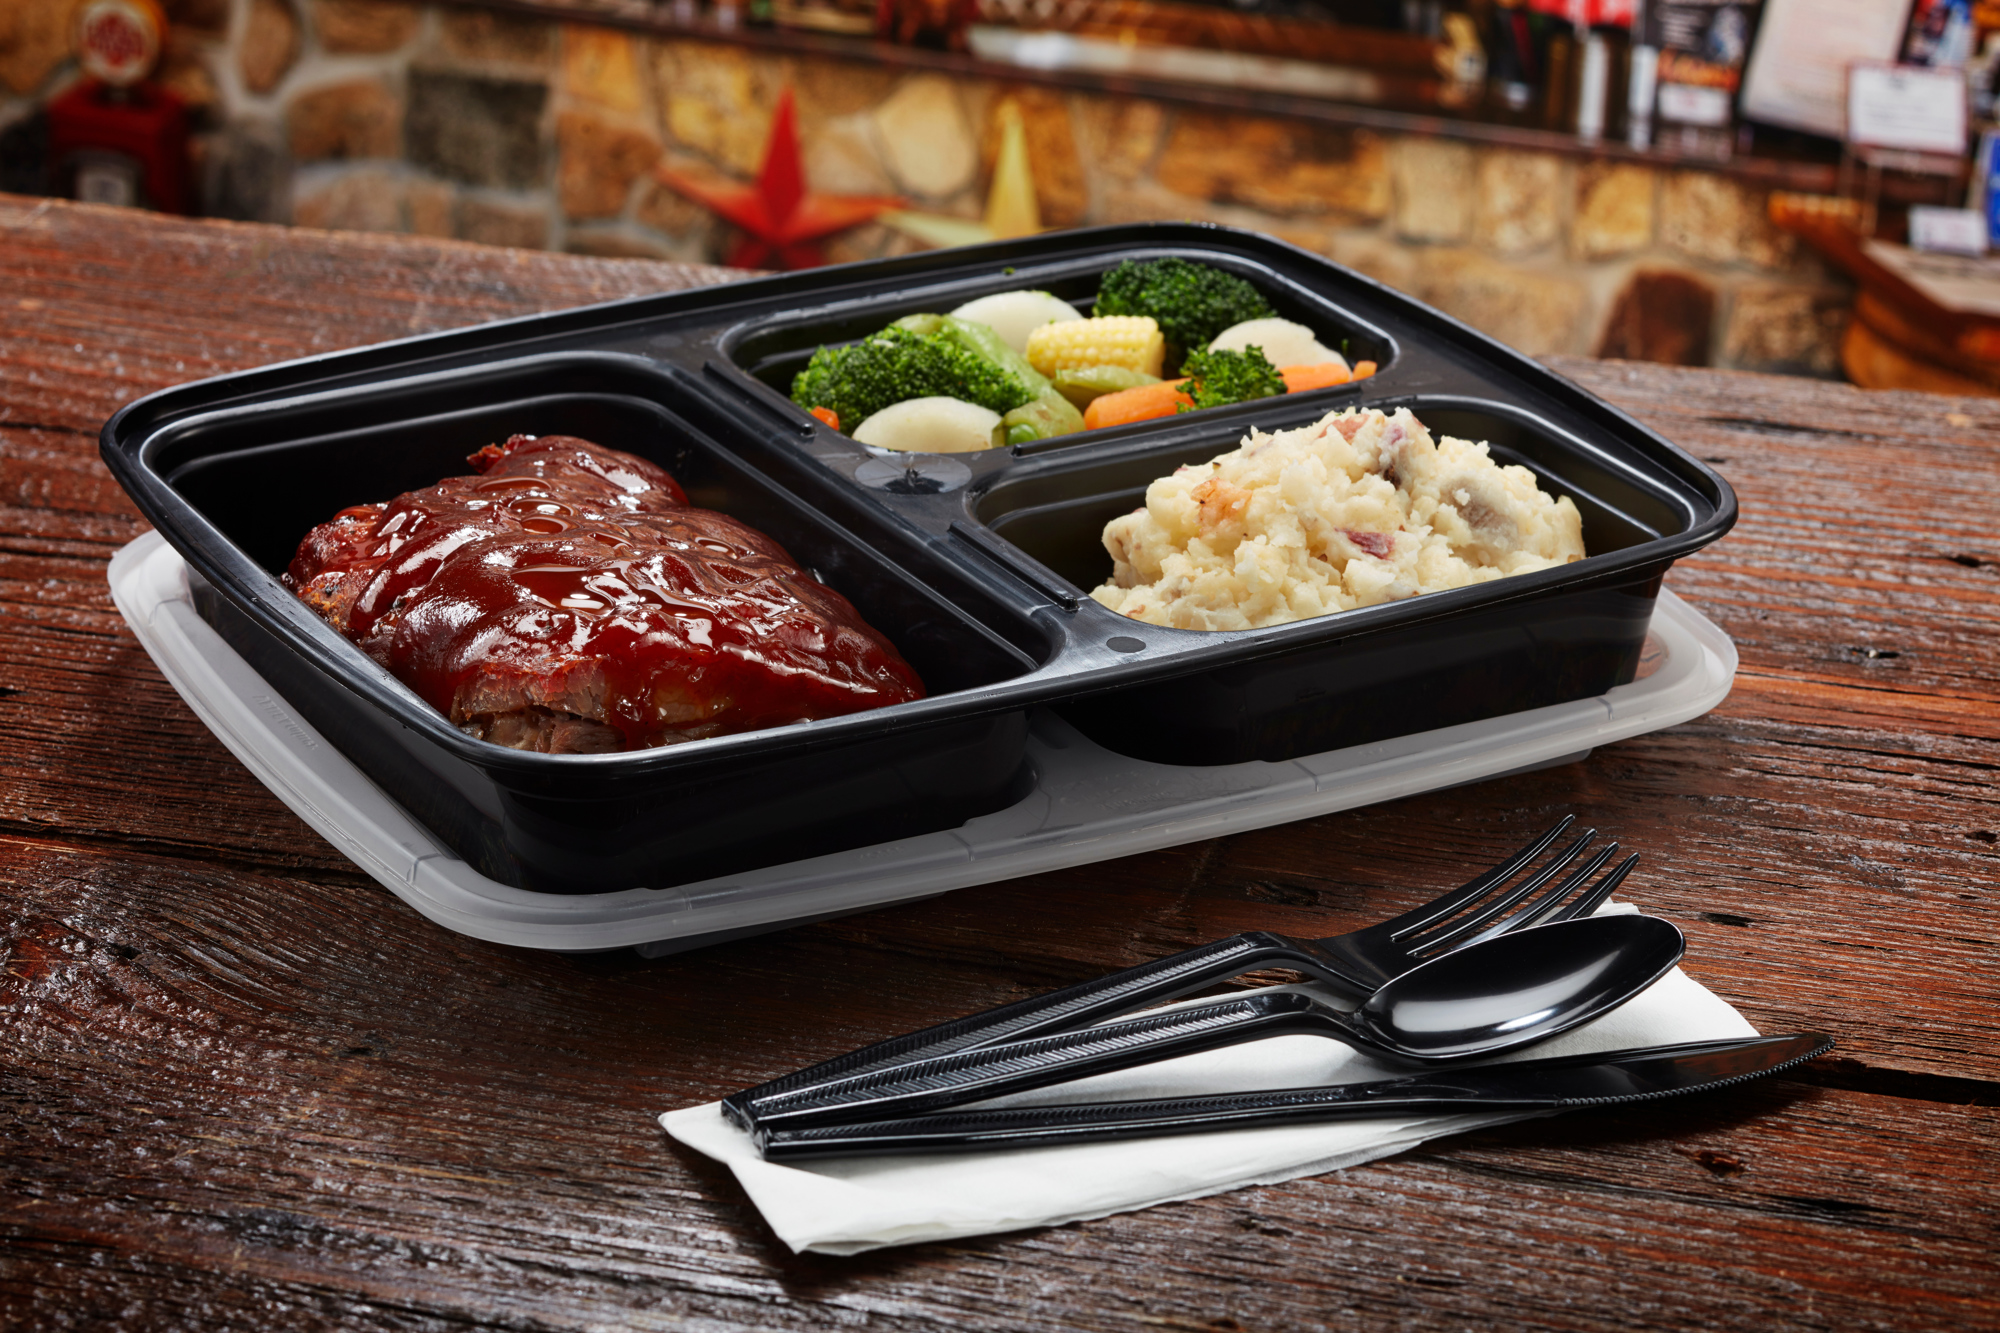 VERSAtainer® 6 oz. Microwavable Oval Takeout Container and Lid Combo,  Black, 150 ct.